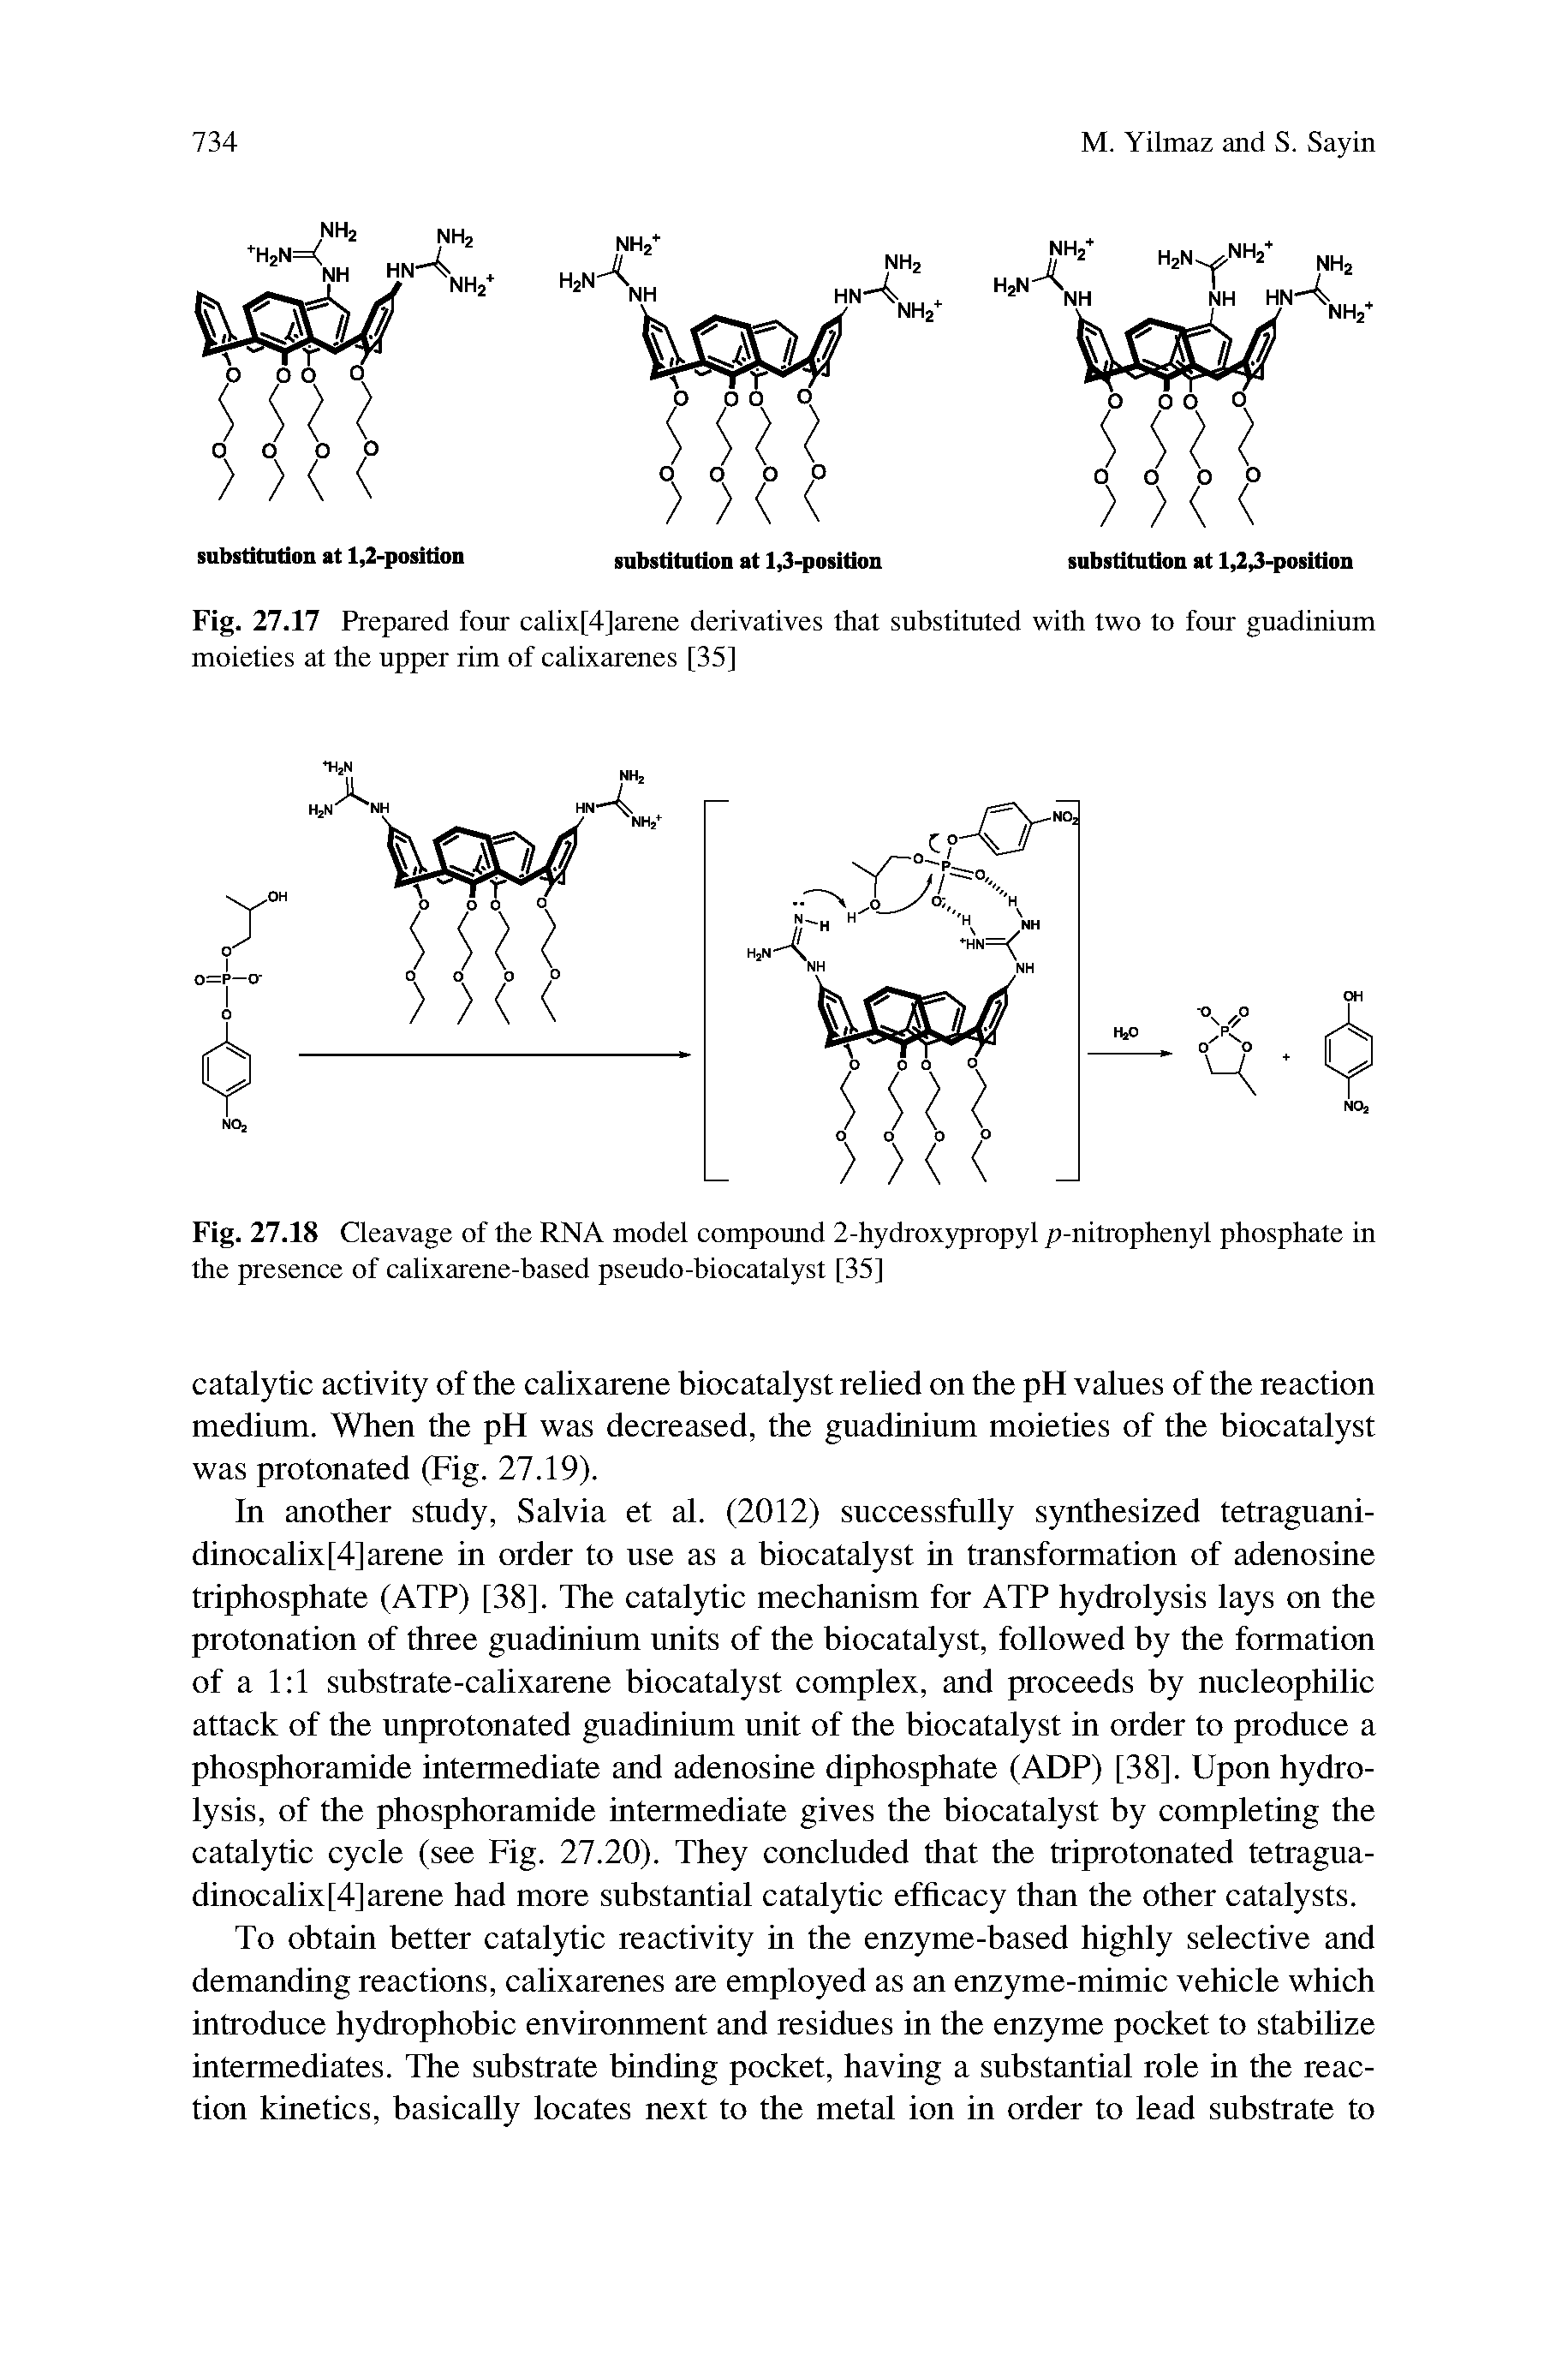 Fig. 27.17 Prepared four calix[4]arene derivatives that substituted with two to four guadinium moieties at the upper rim of calixarenes [35]...